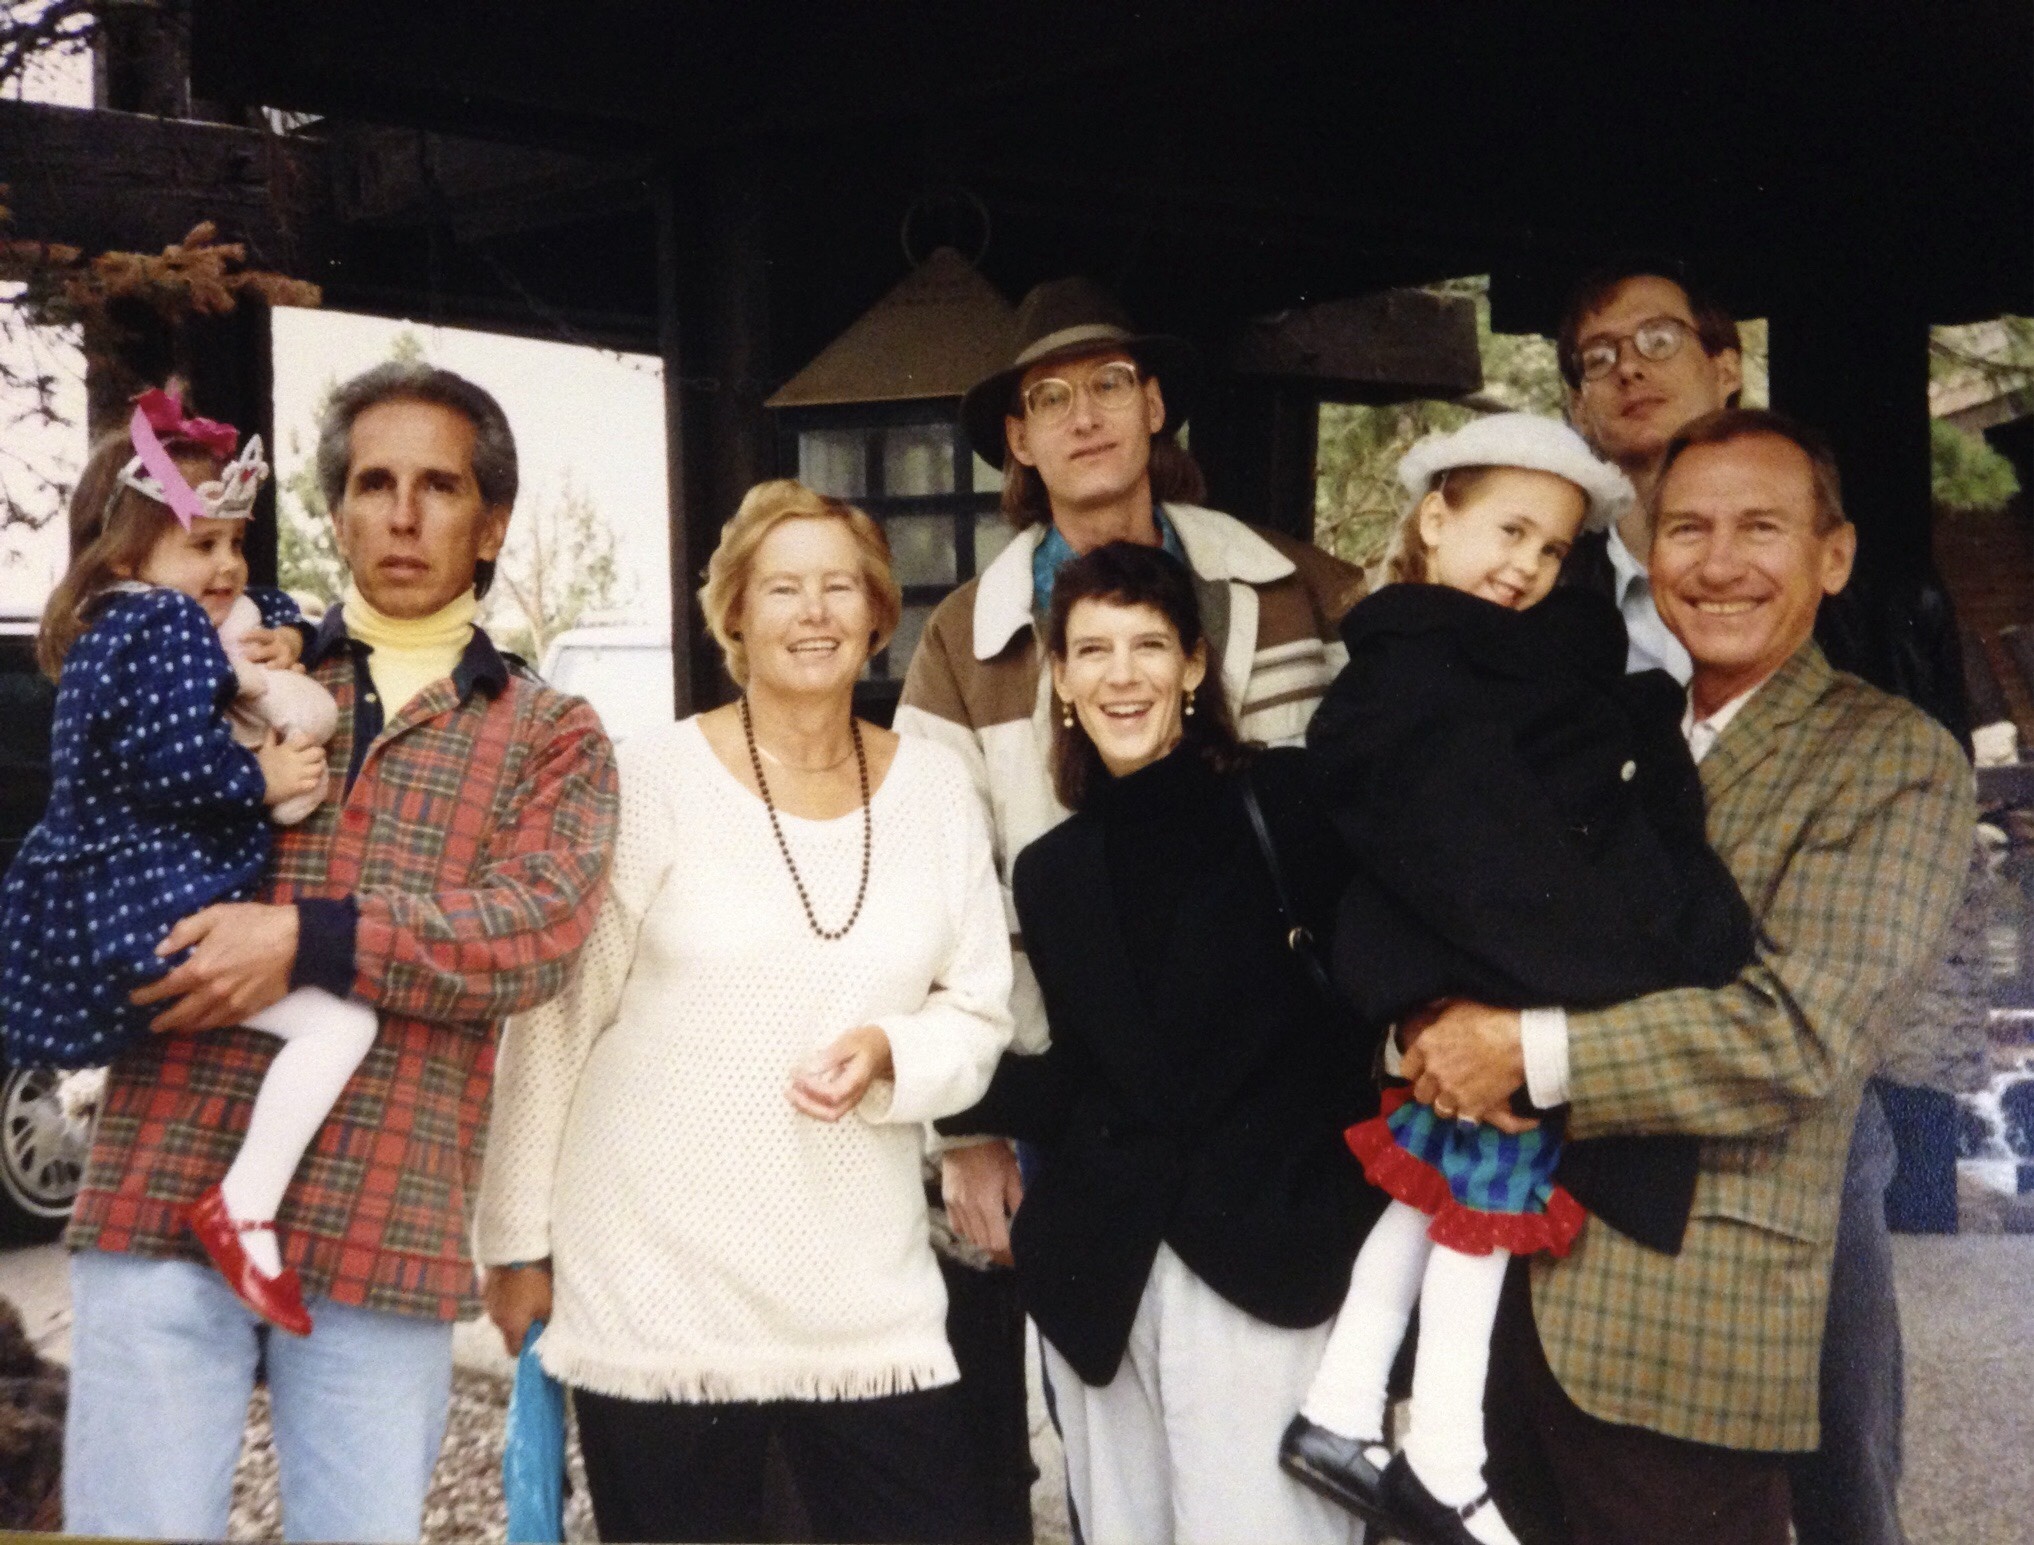 Lore and her family in the early 1990's.